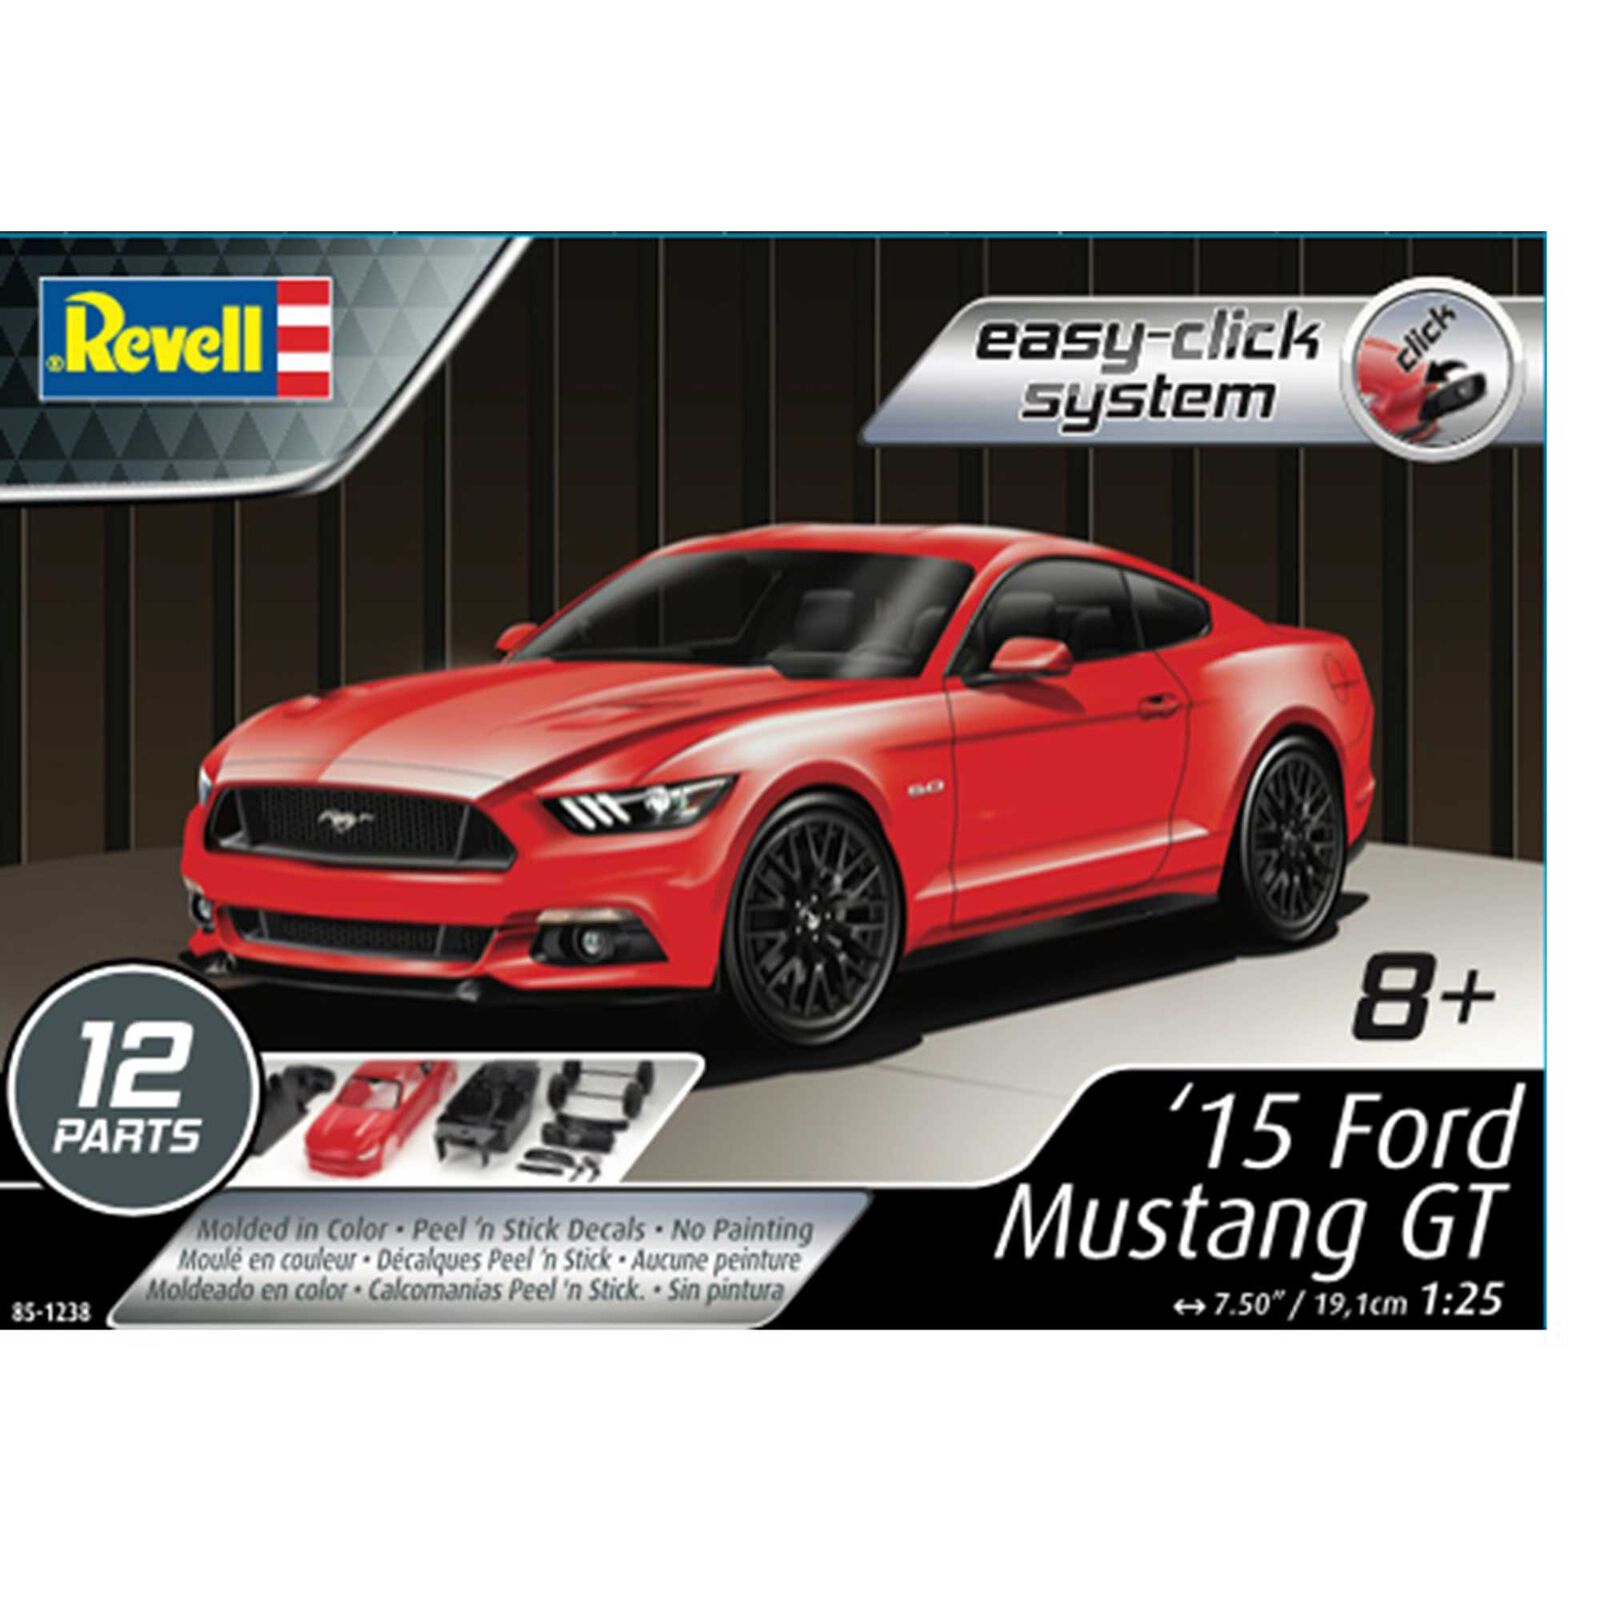 1/25 2015 Ford Mustang GT "Easy-Click"